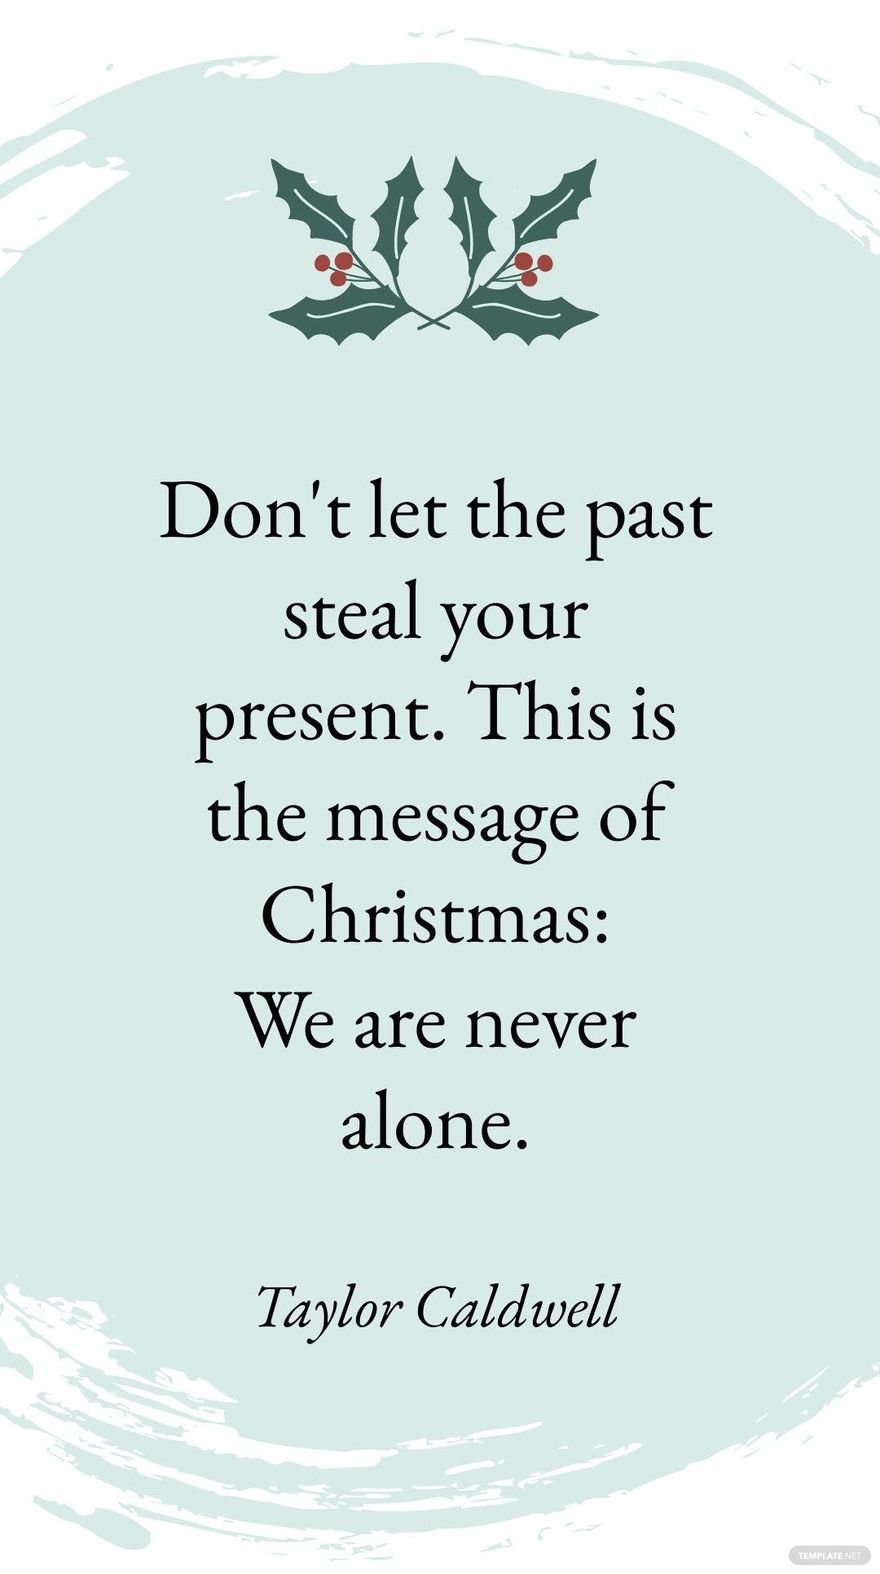 Free Taylor Caldwell - Don't let the past steal your present. This is the message of Christmas: We are never alone. in JPG